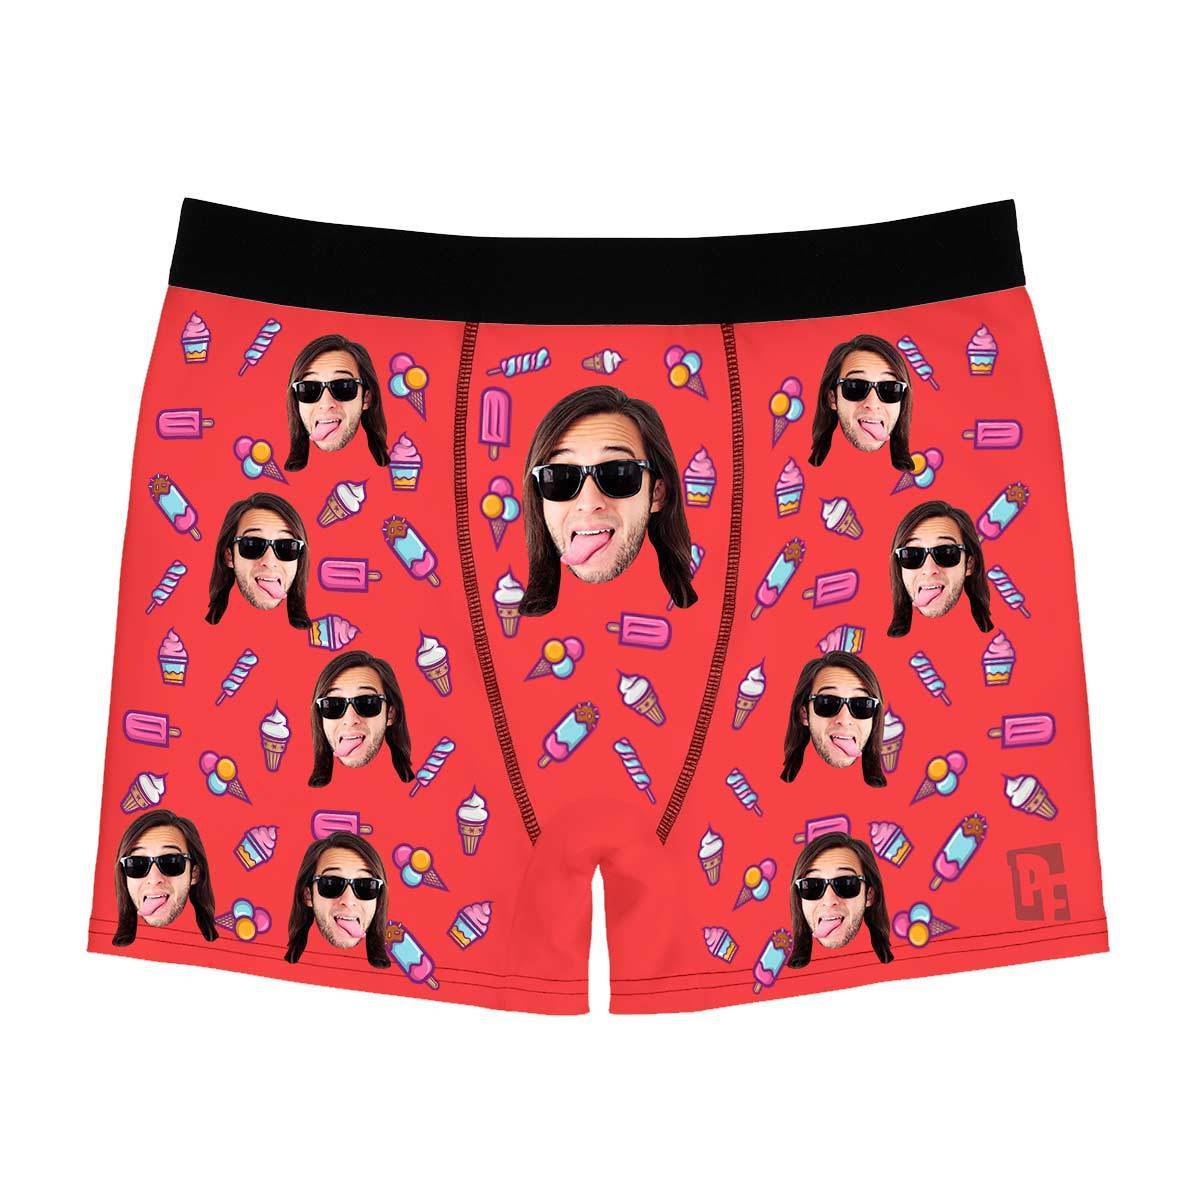 Red Candies men's boxer briefs personalized with photo printed on them